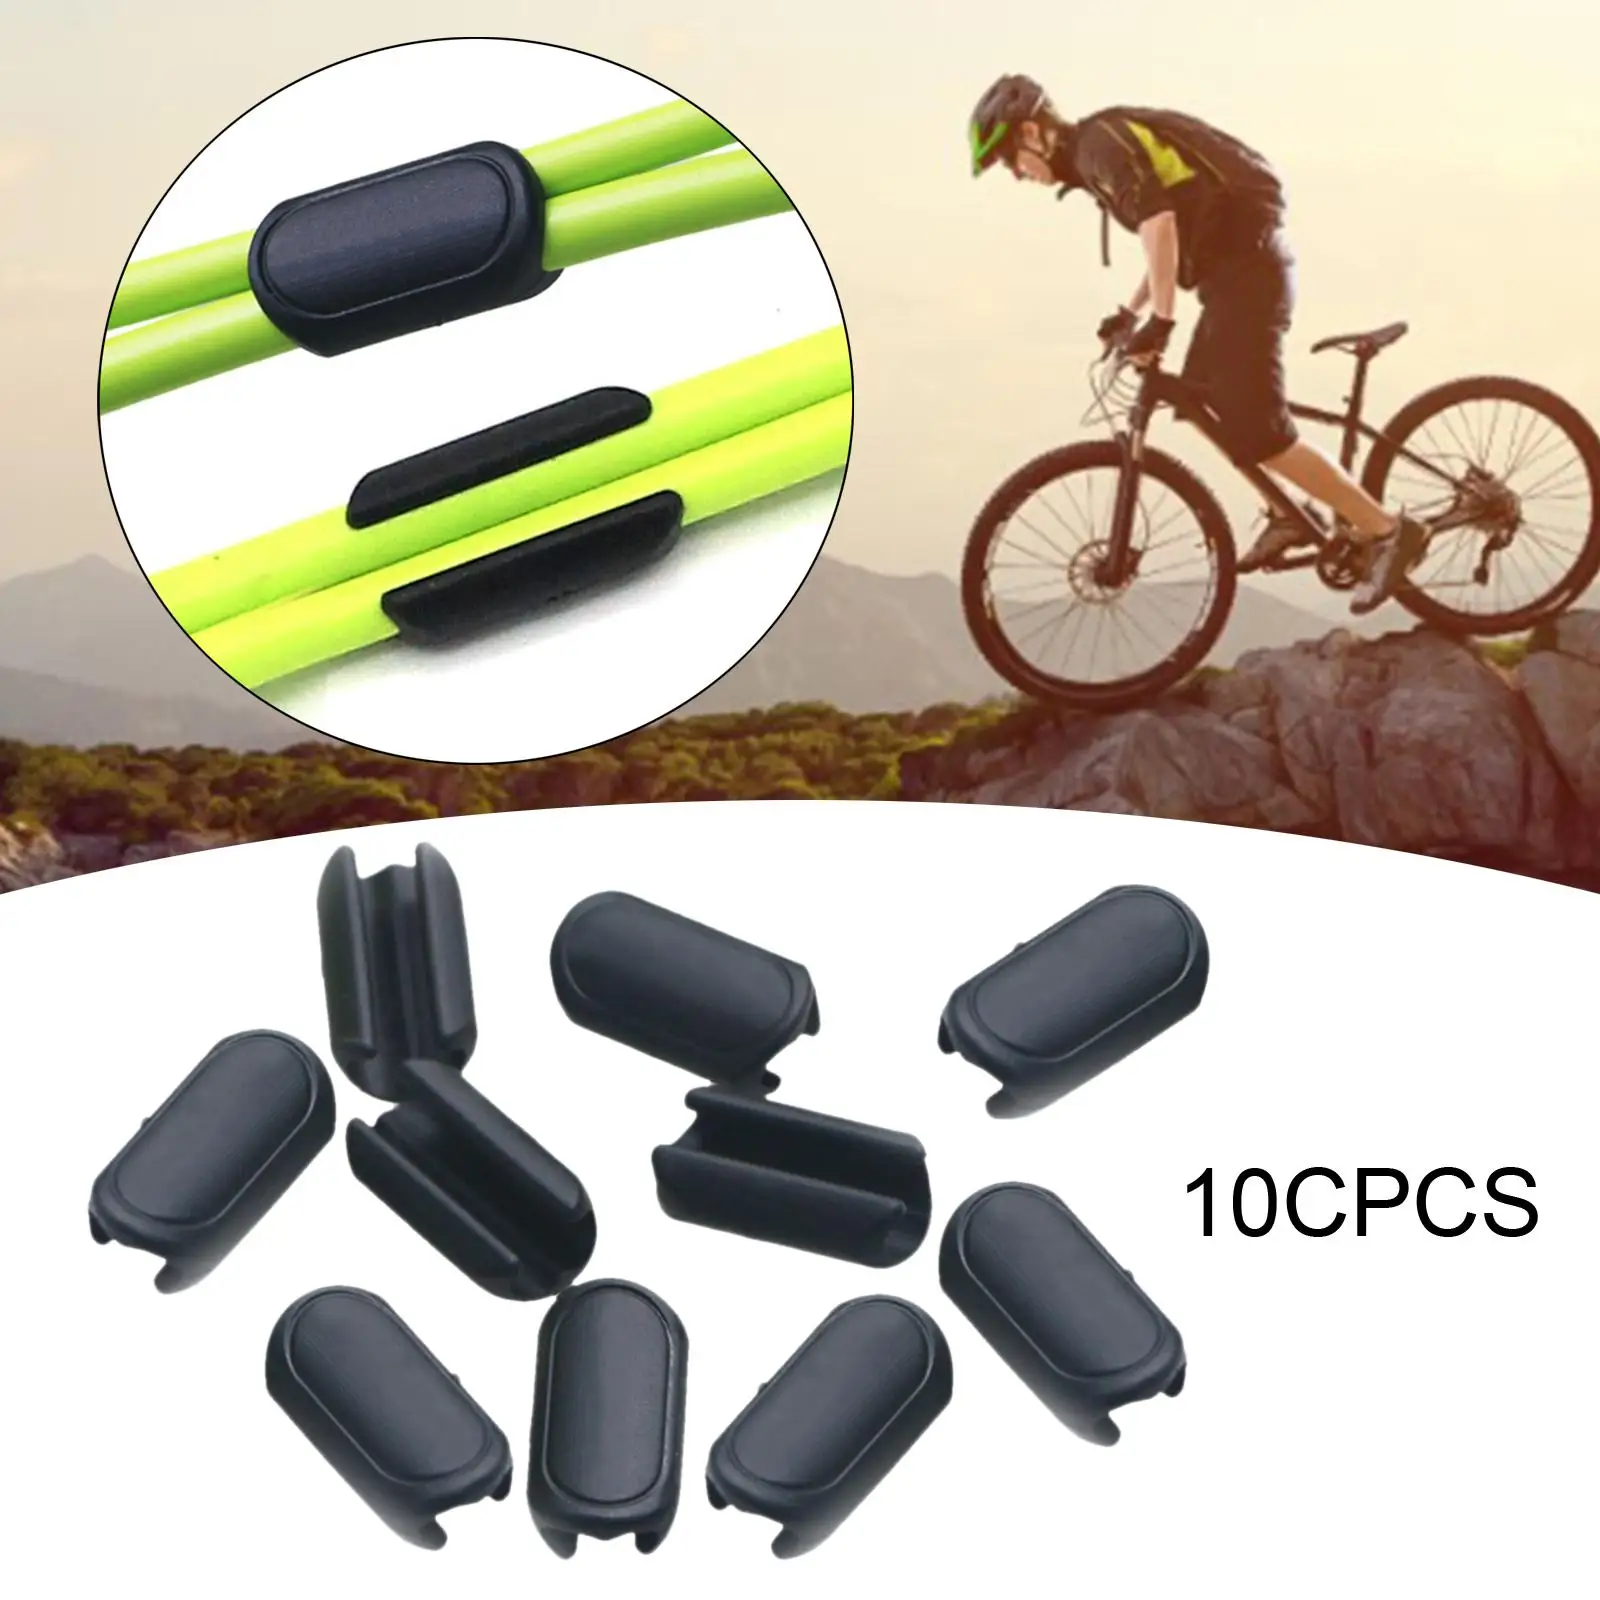 Set of 10 Bike Bike Cable Clips Housing Hose Guide Clamps, Frame Buckle, Bicycle Rotating Clips